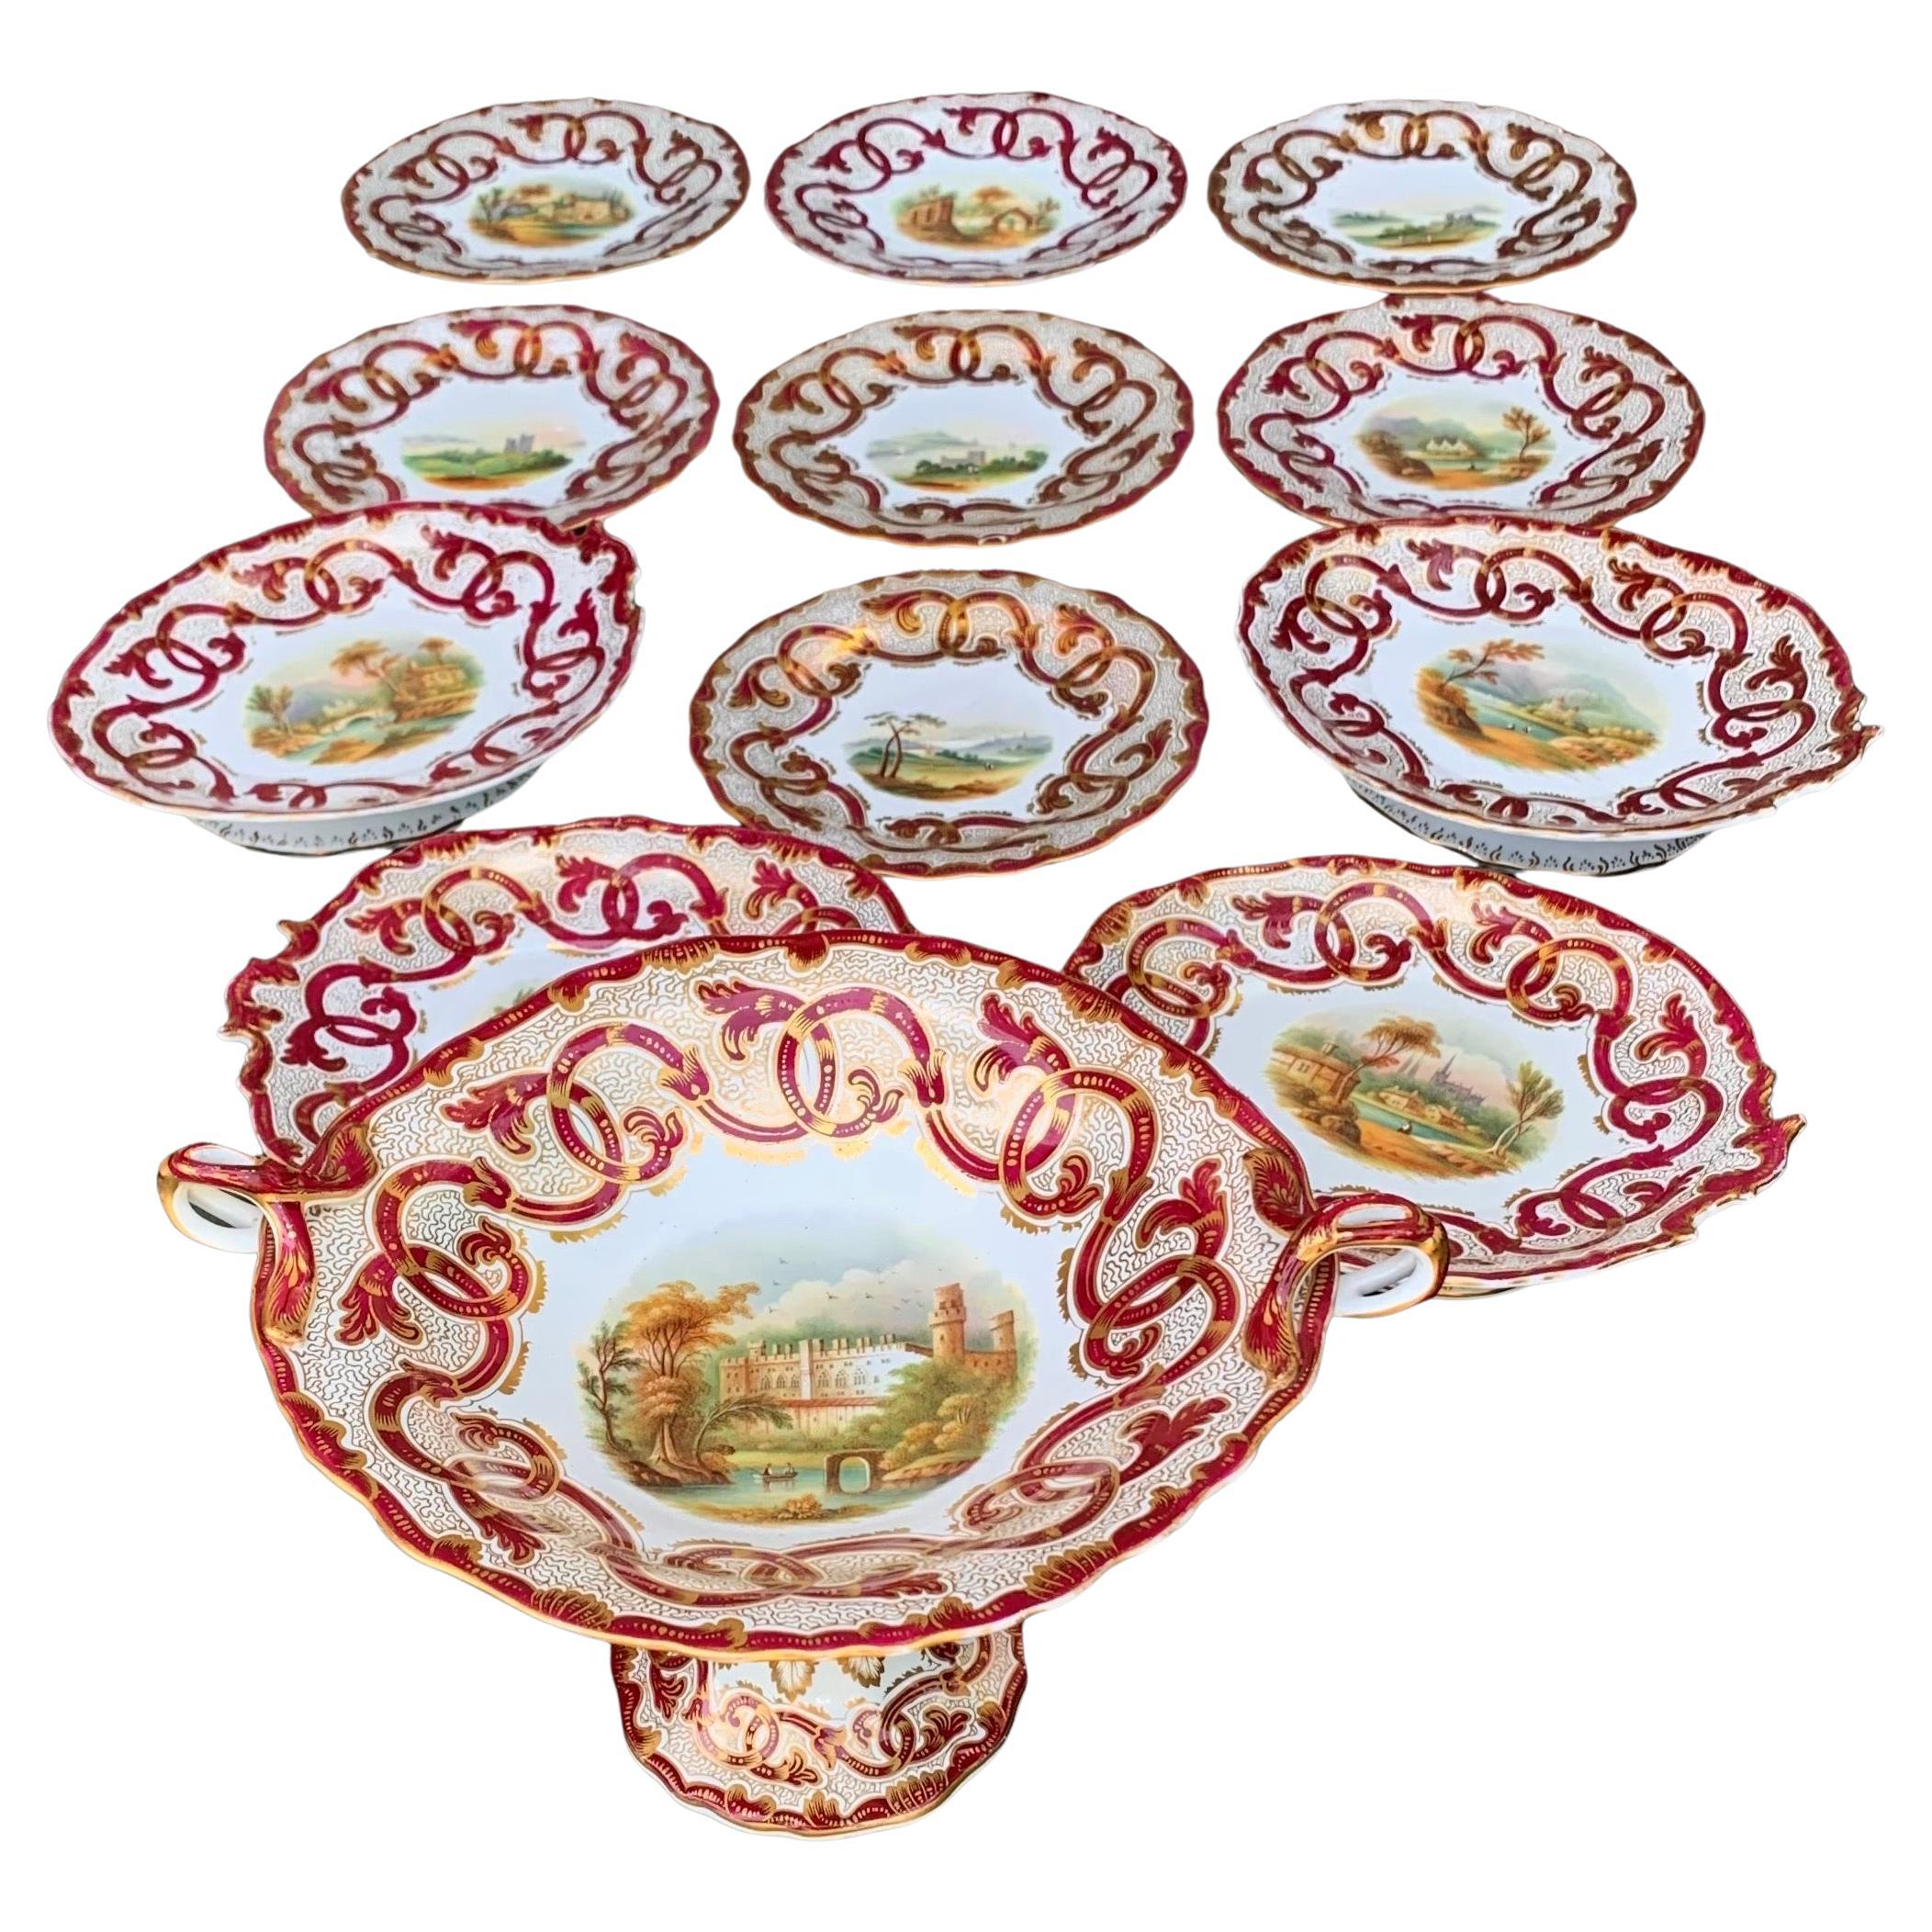 Early 19th Century W. Adams & Sons Stoke-Upon-Trent. English Staffordshire  For Sale